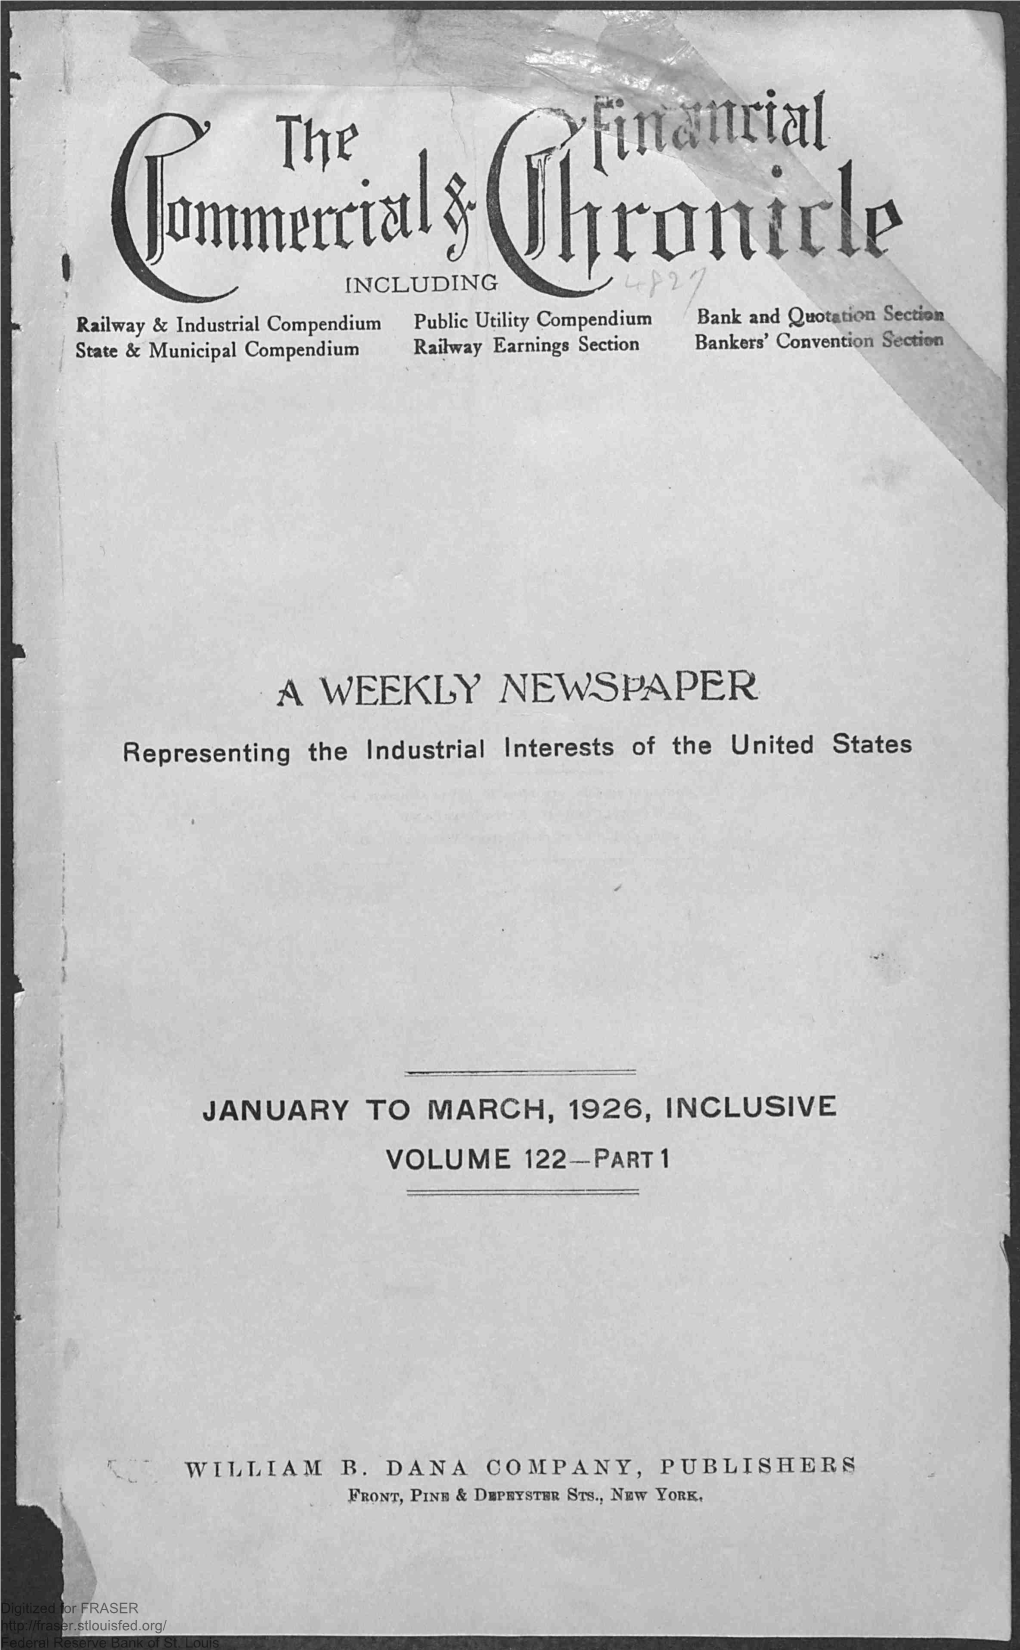 January to March 1926, Inclusive: Index To